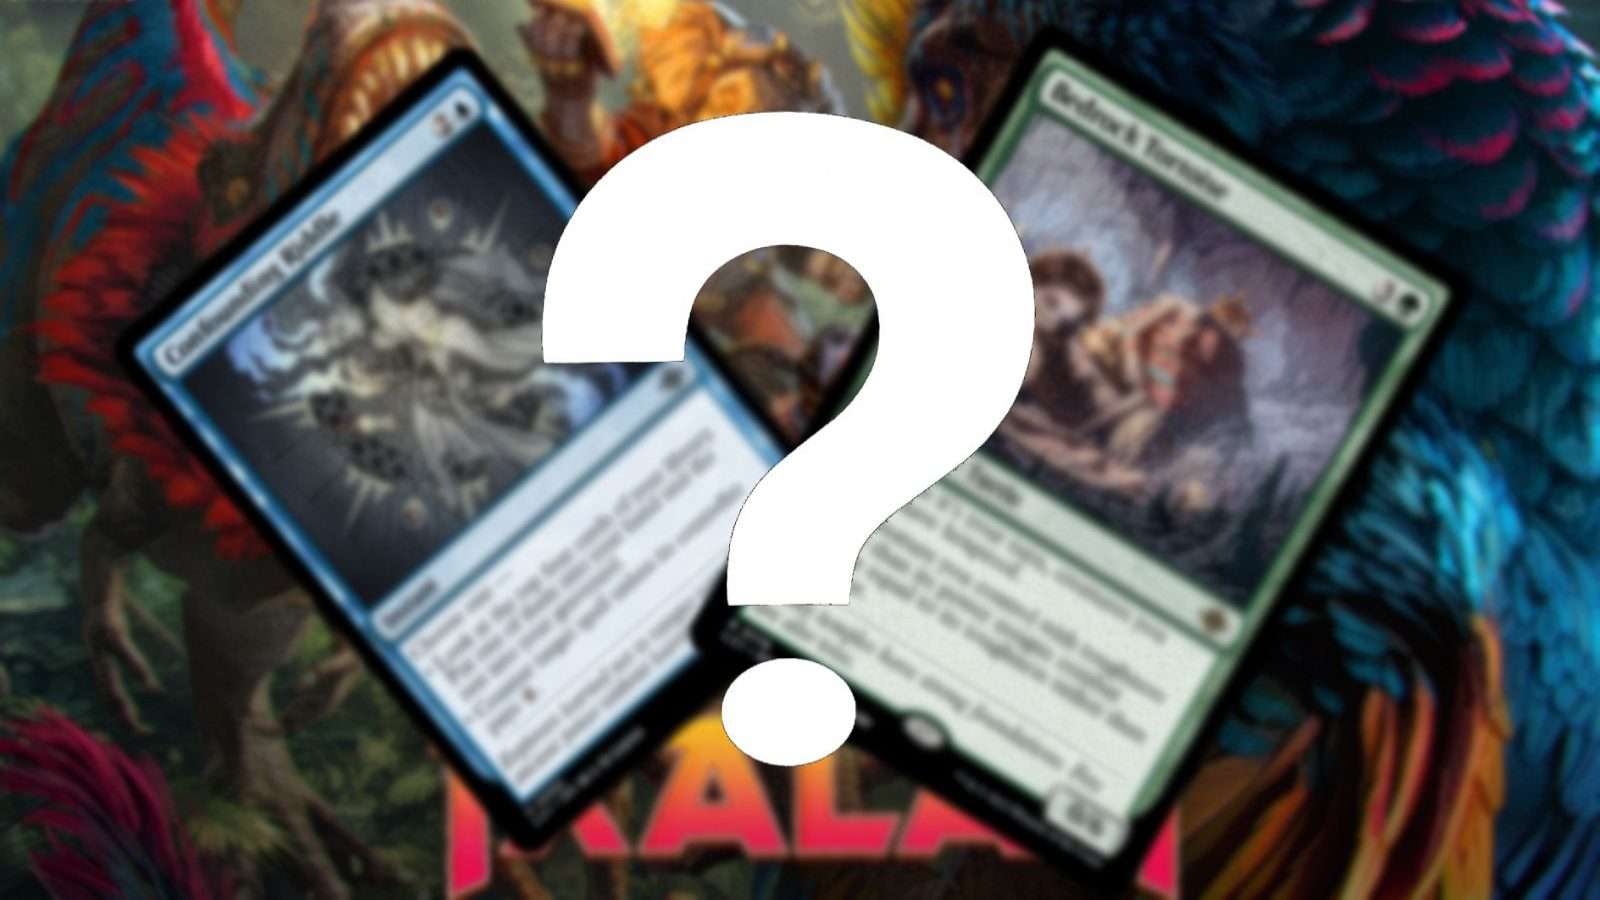 MTG Ixalan card reveal header, two cards on blurred background with question mark